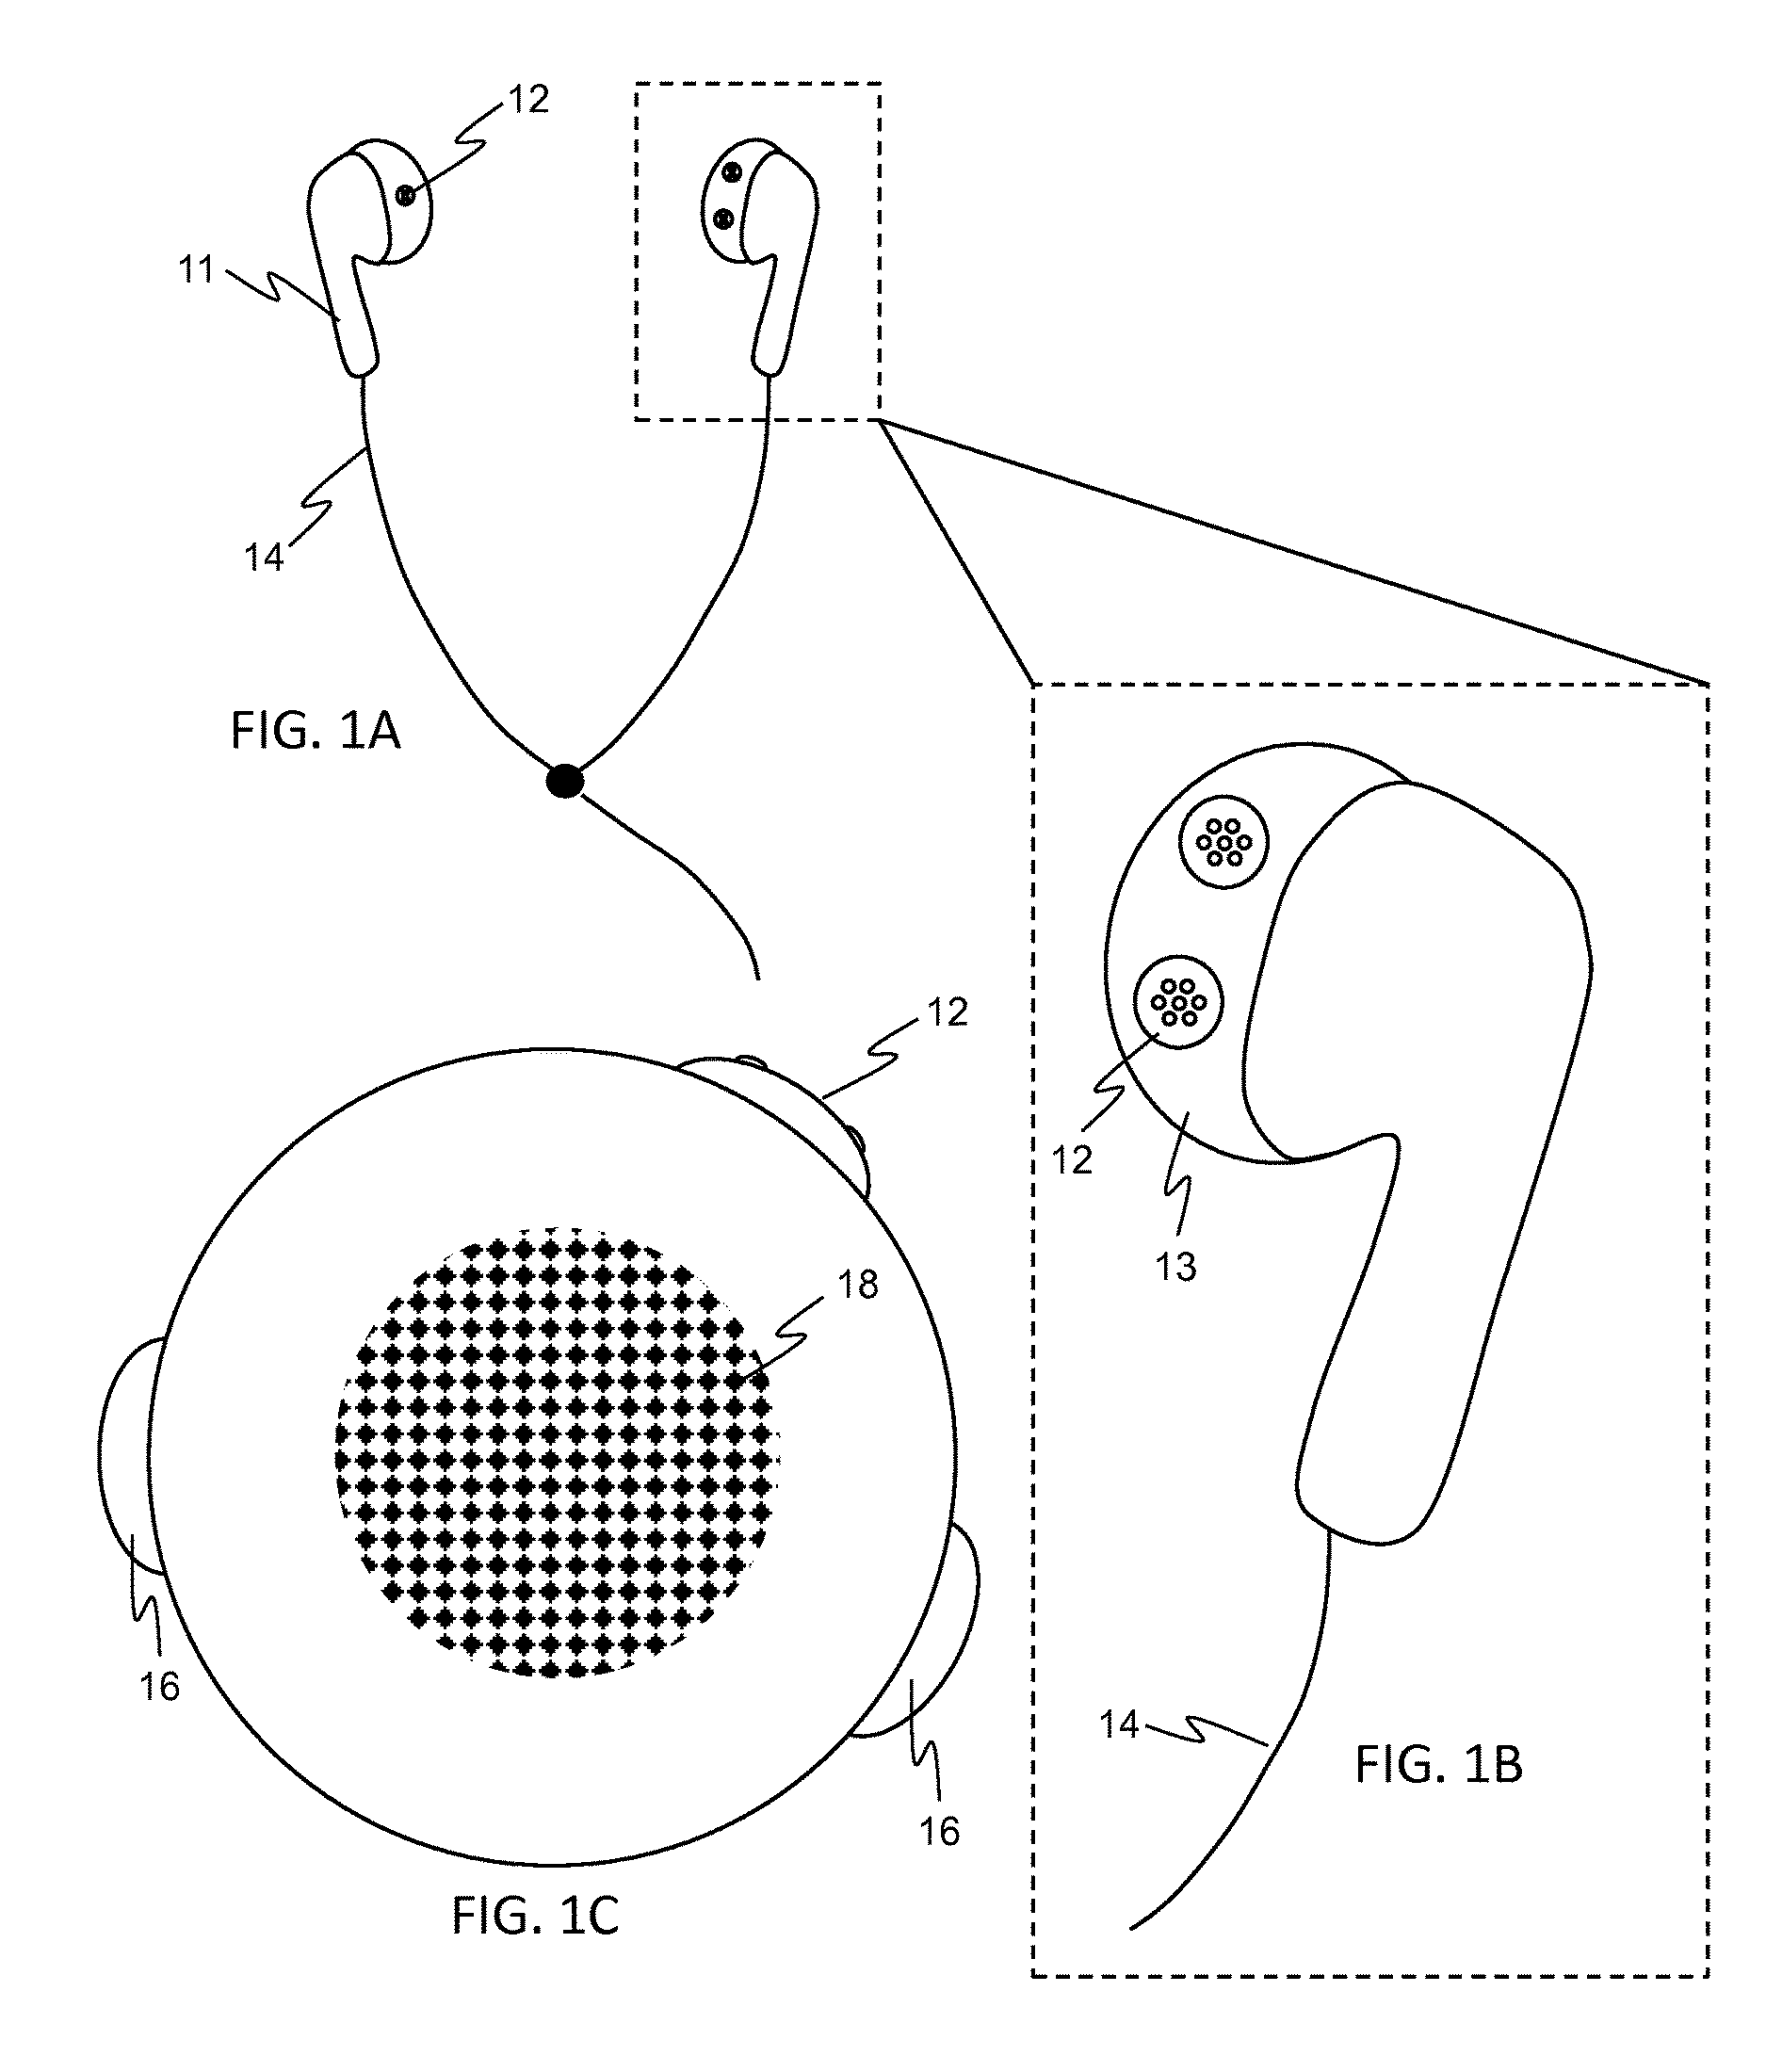 Head-mounted physiological signal monitoring system, devices and methods